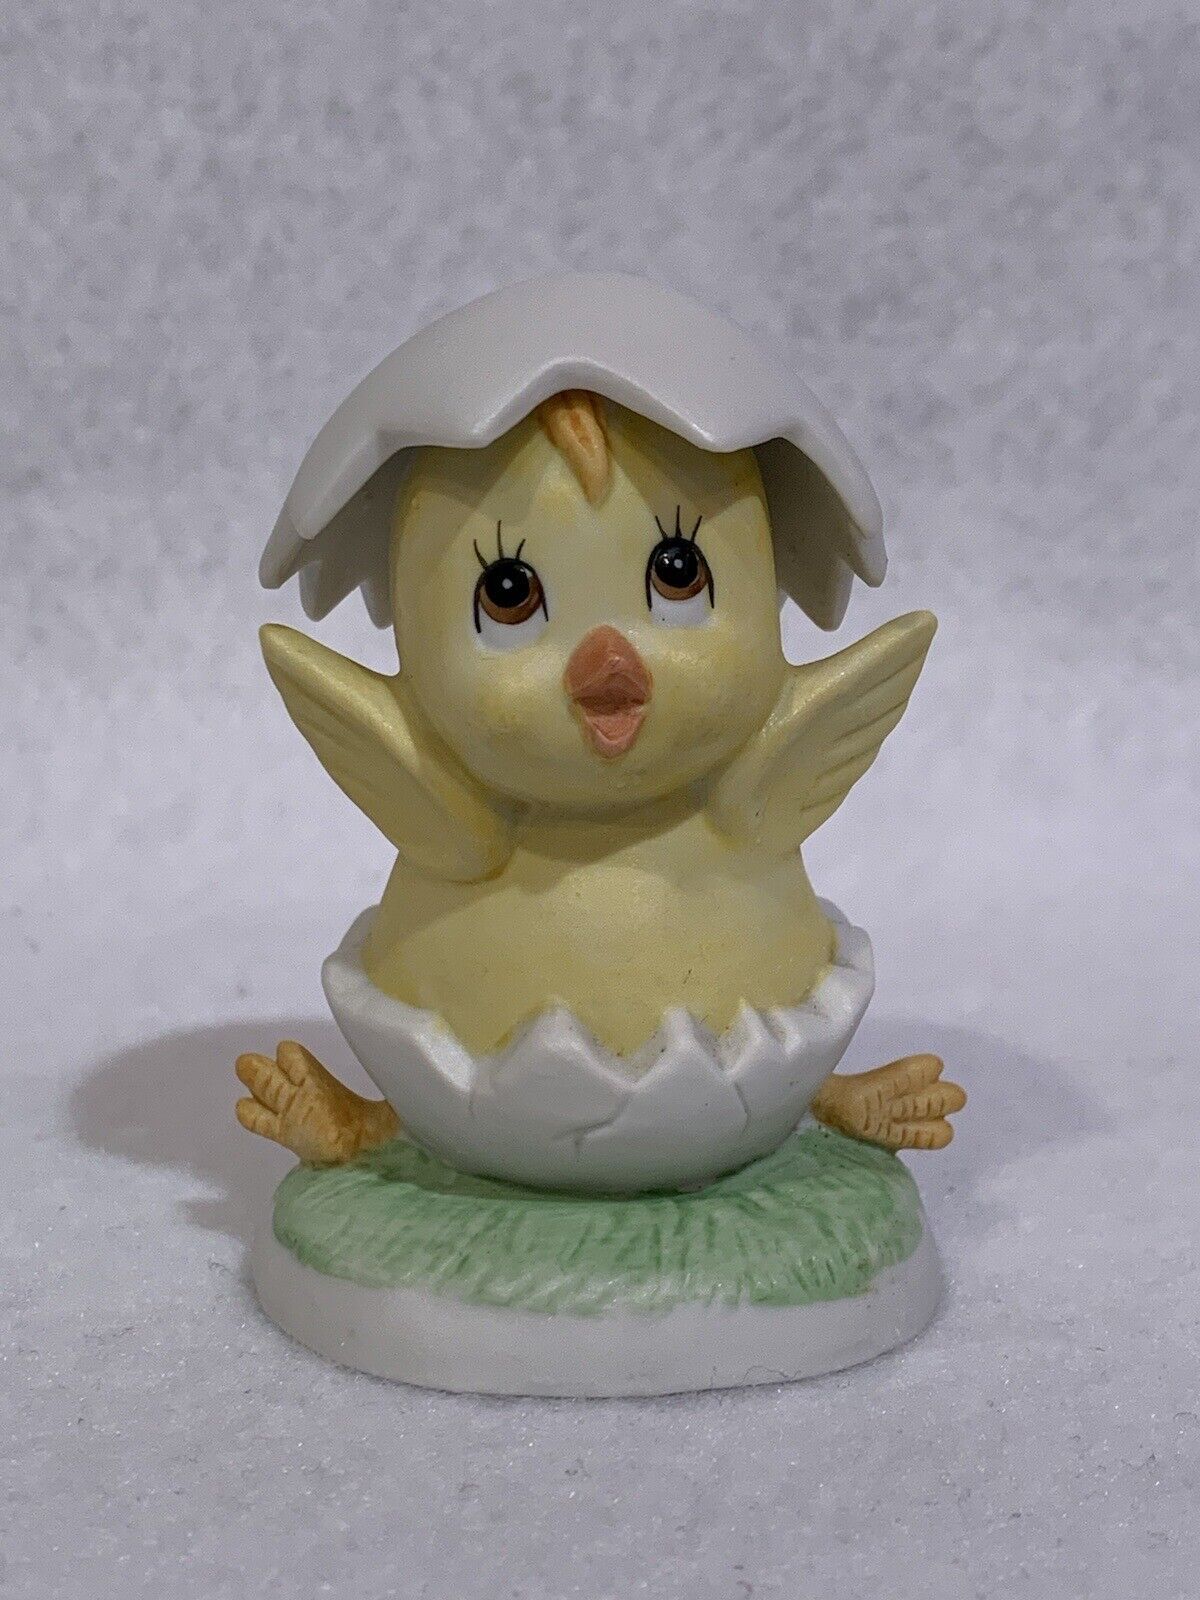 Vintage Lefton Yellow Chick Duckling Spring Figurine Egg #04518 Hand Painted